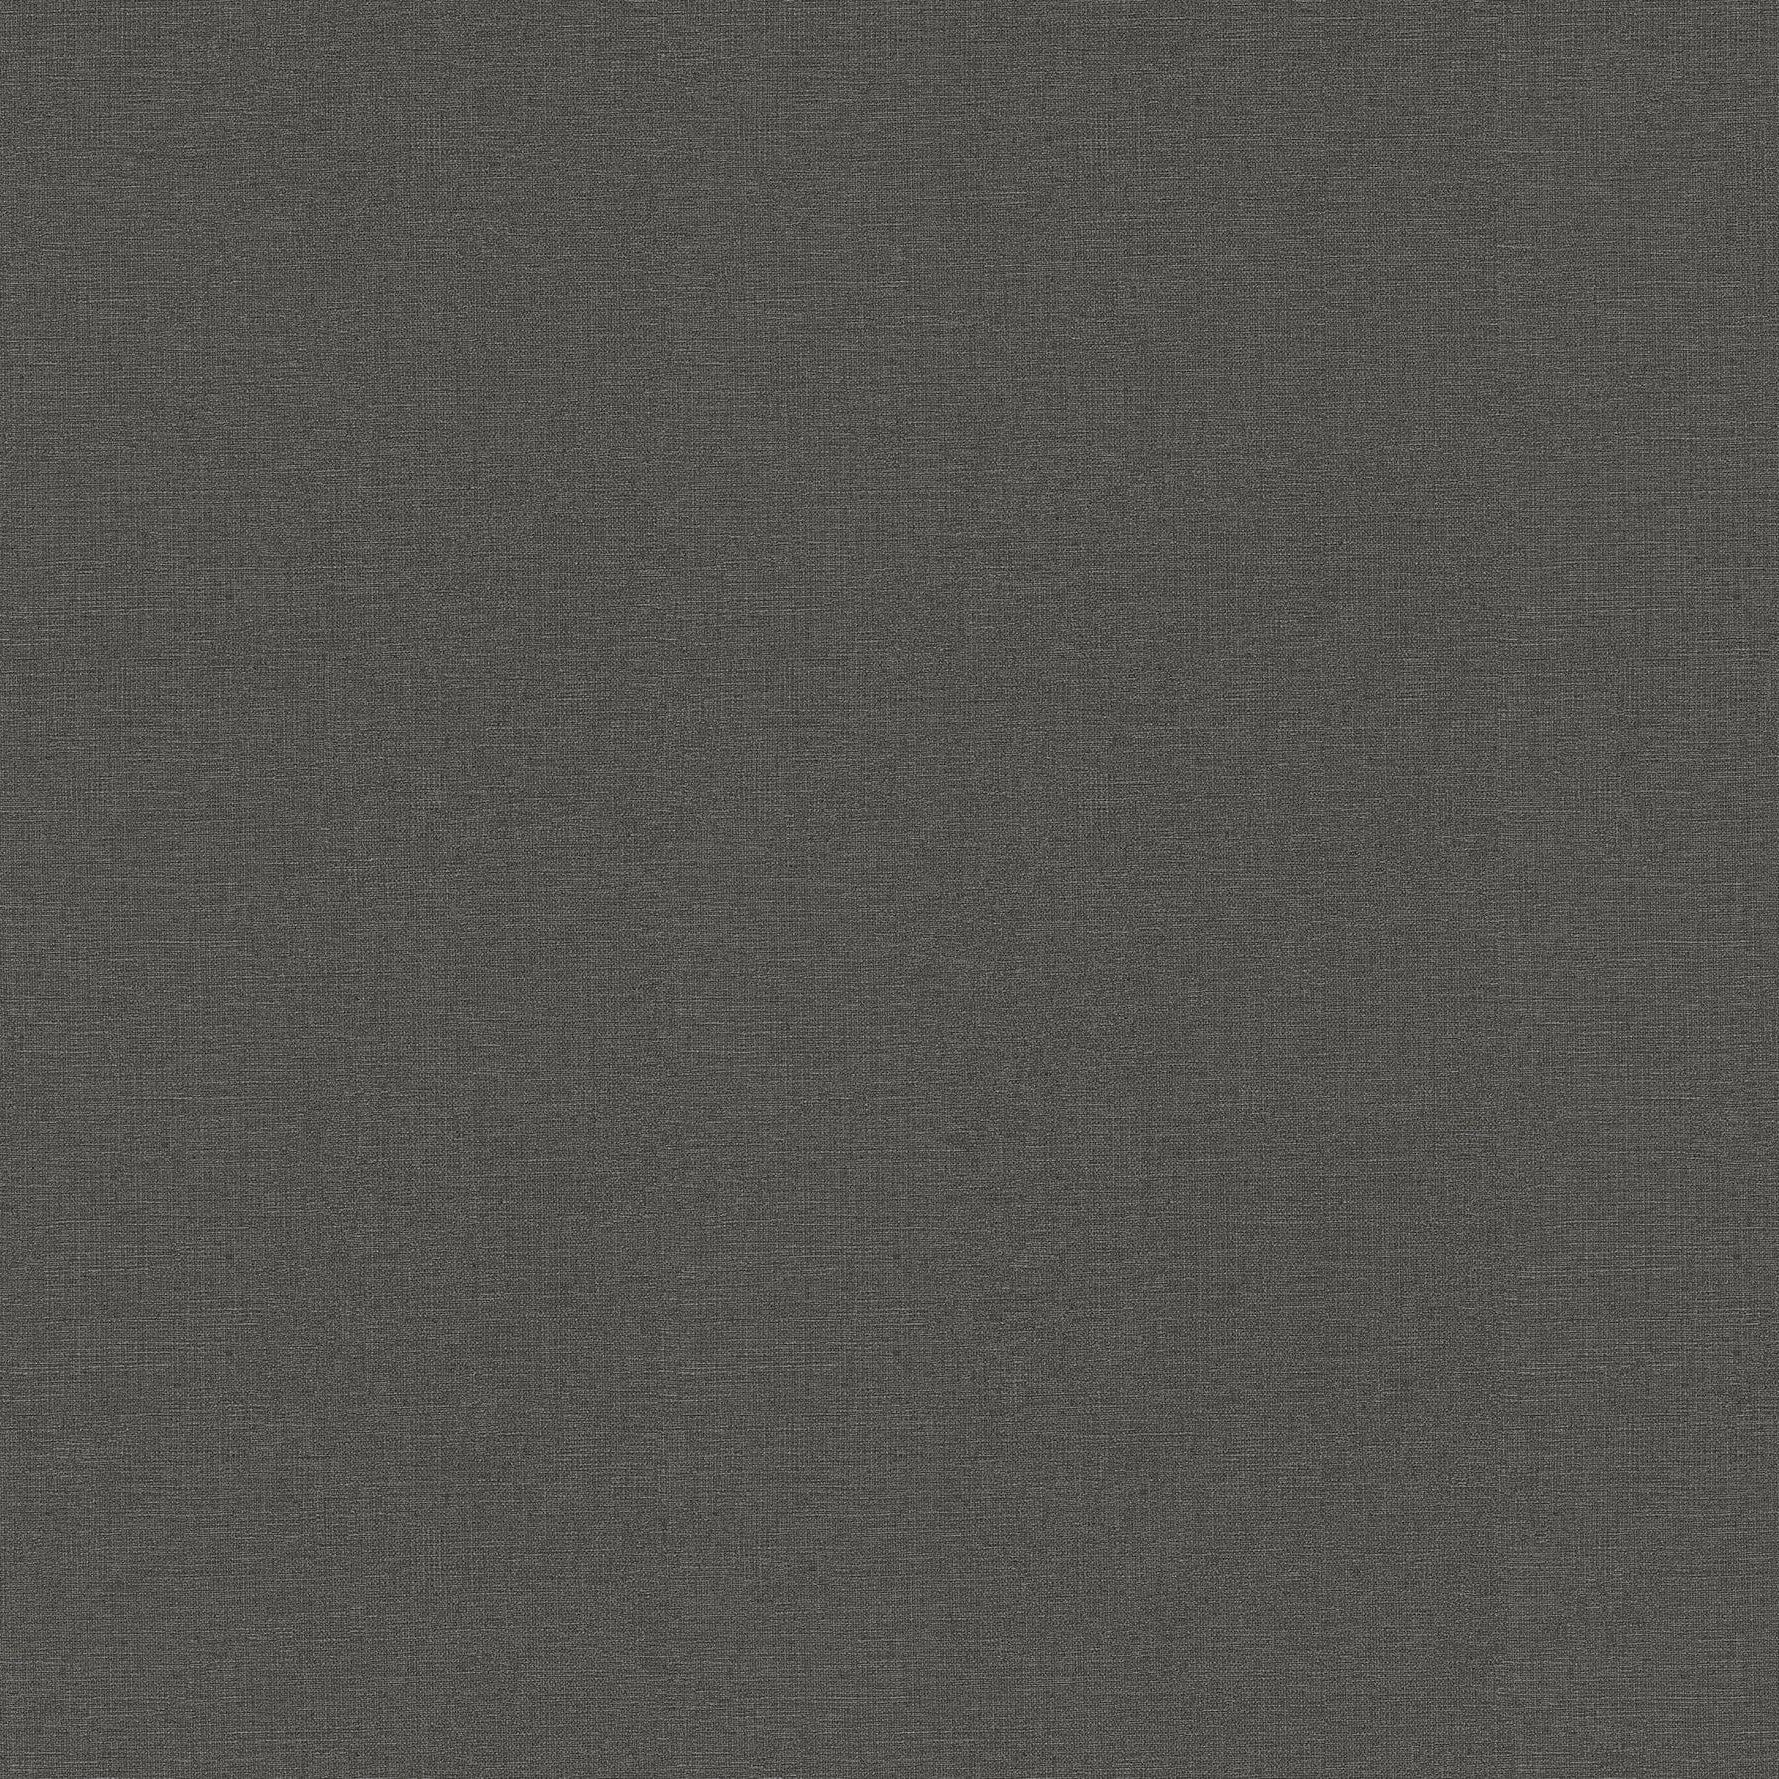 Search 2971-86317 Dimensions Meade Charcoal Fine Weave Charcoal A-Street Prints Wallpaper